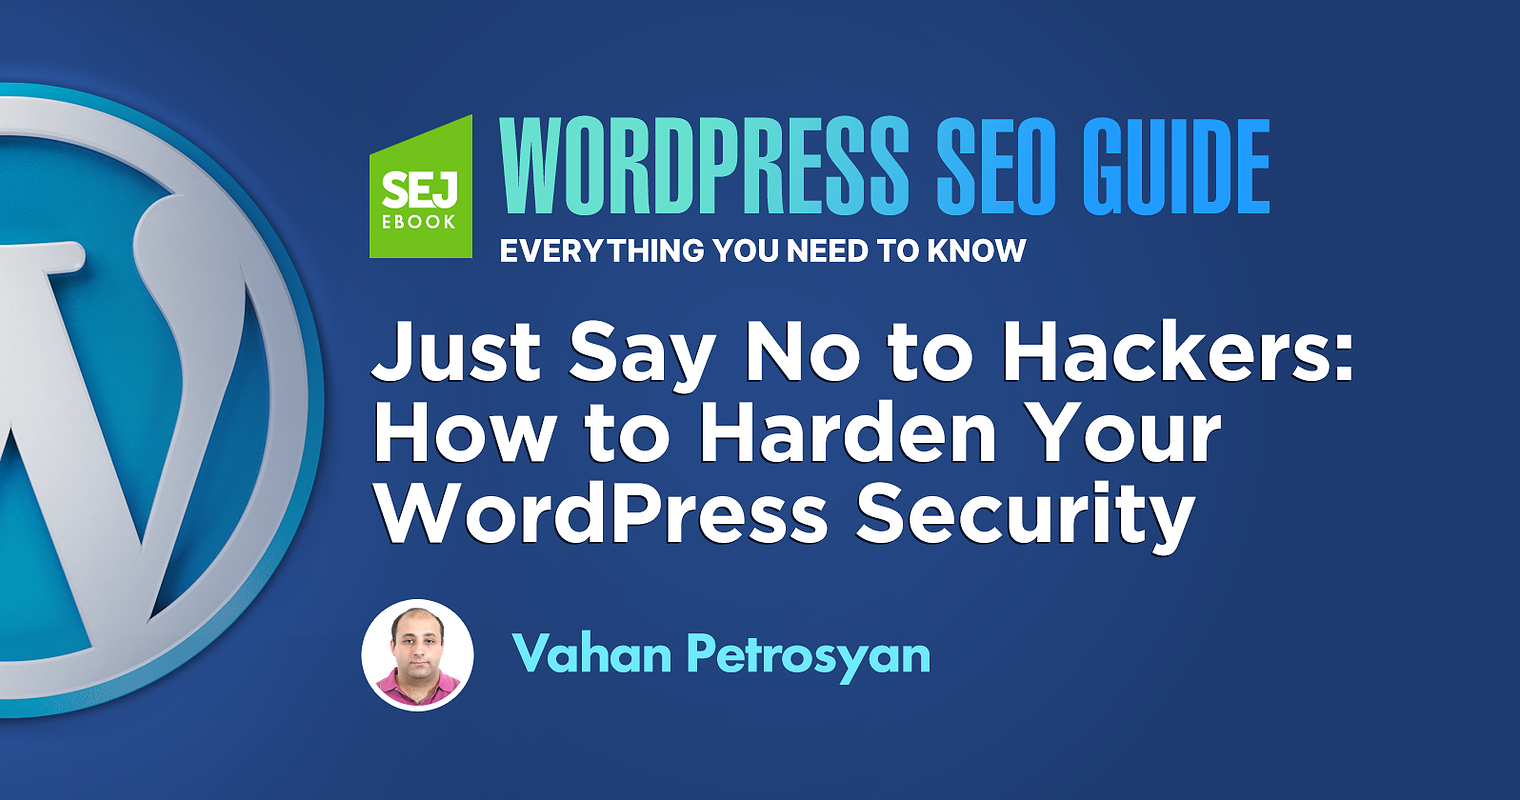 WordPress Security: 16 Steps to Secure & Protect Your Site